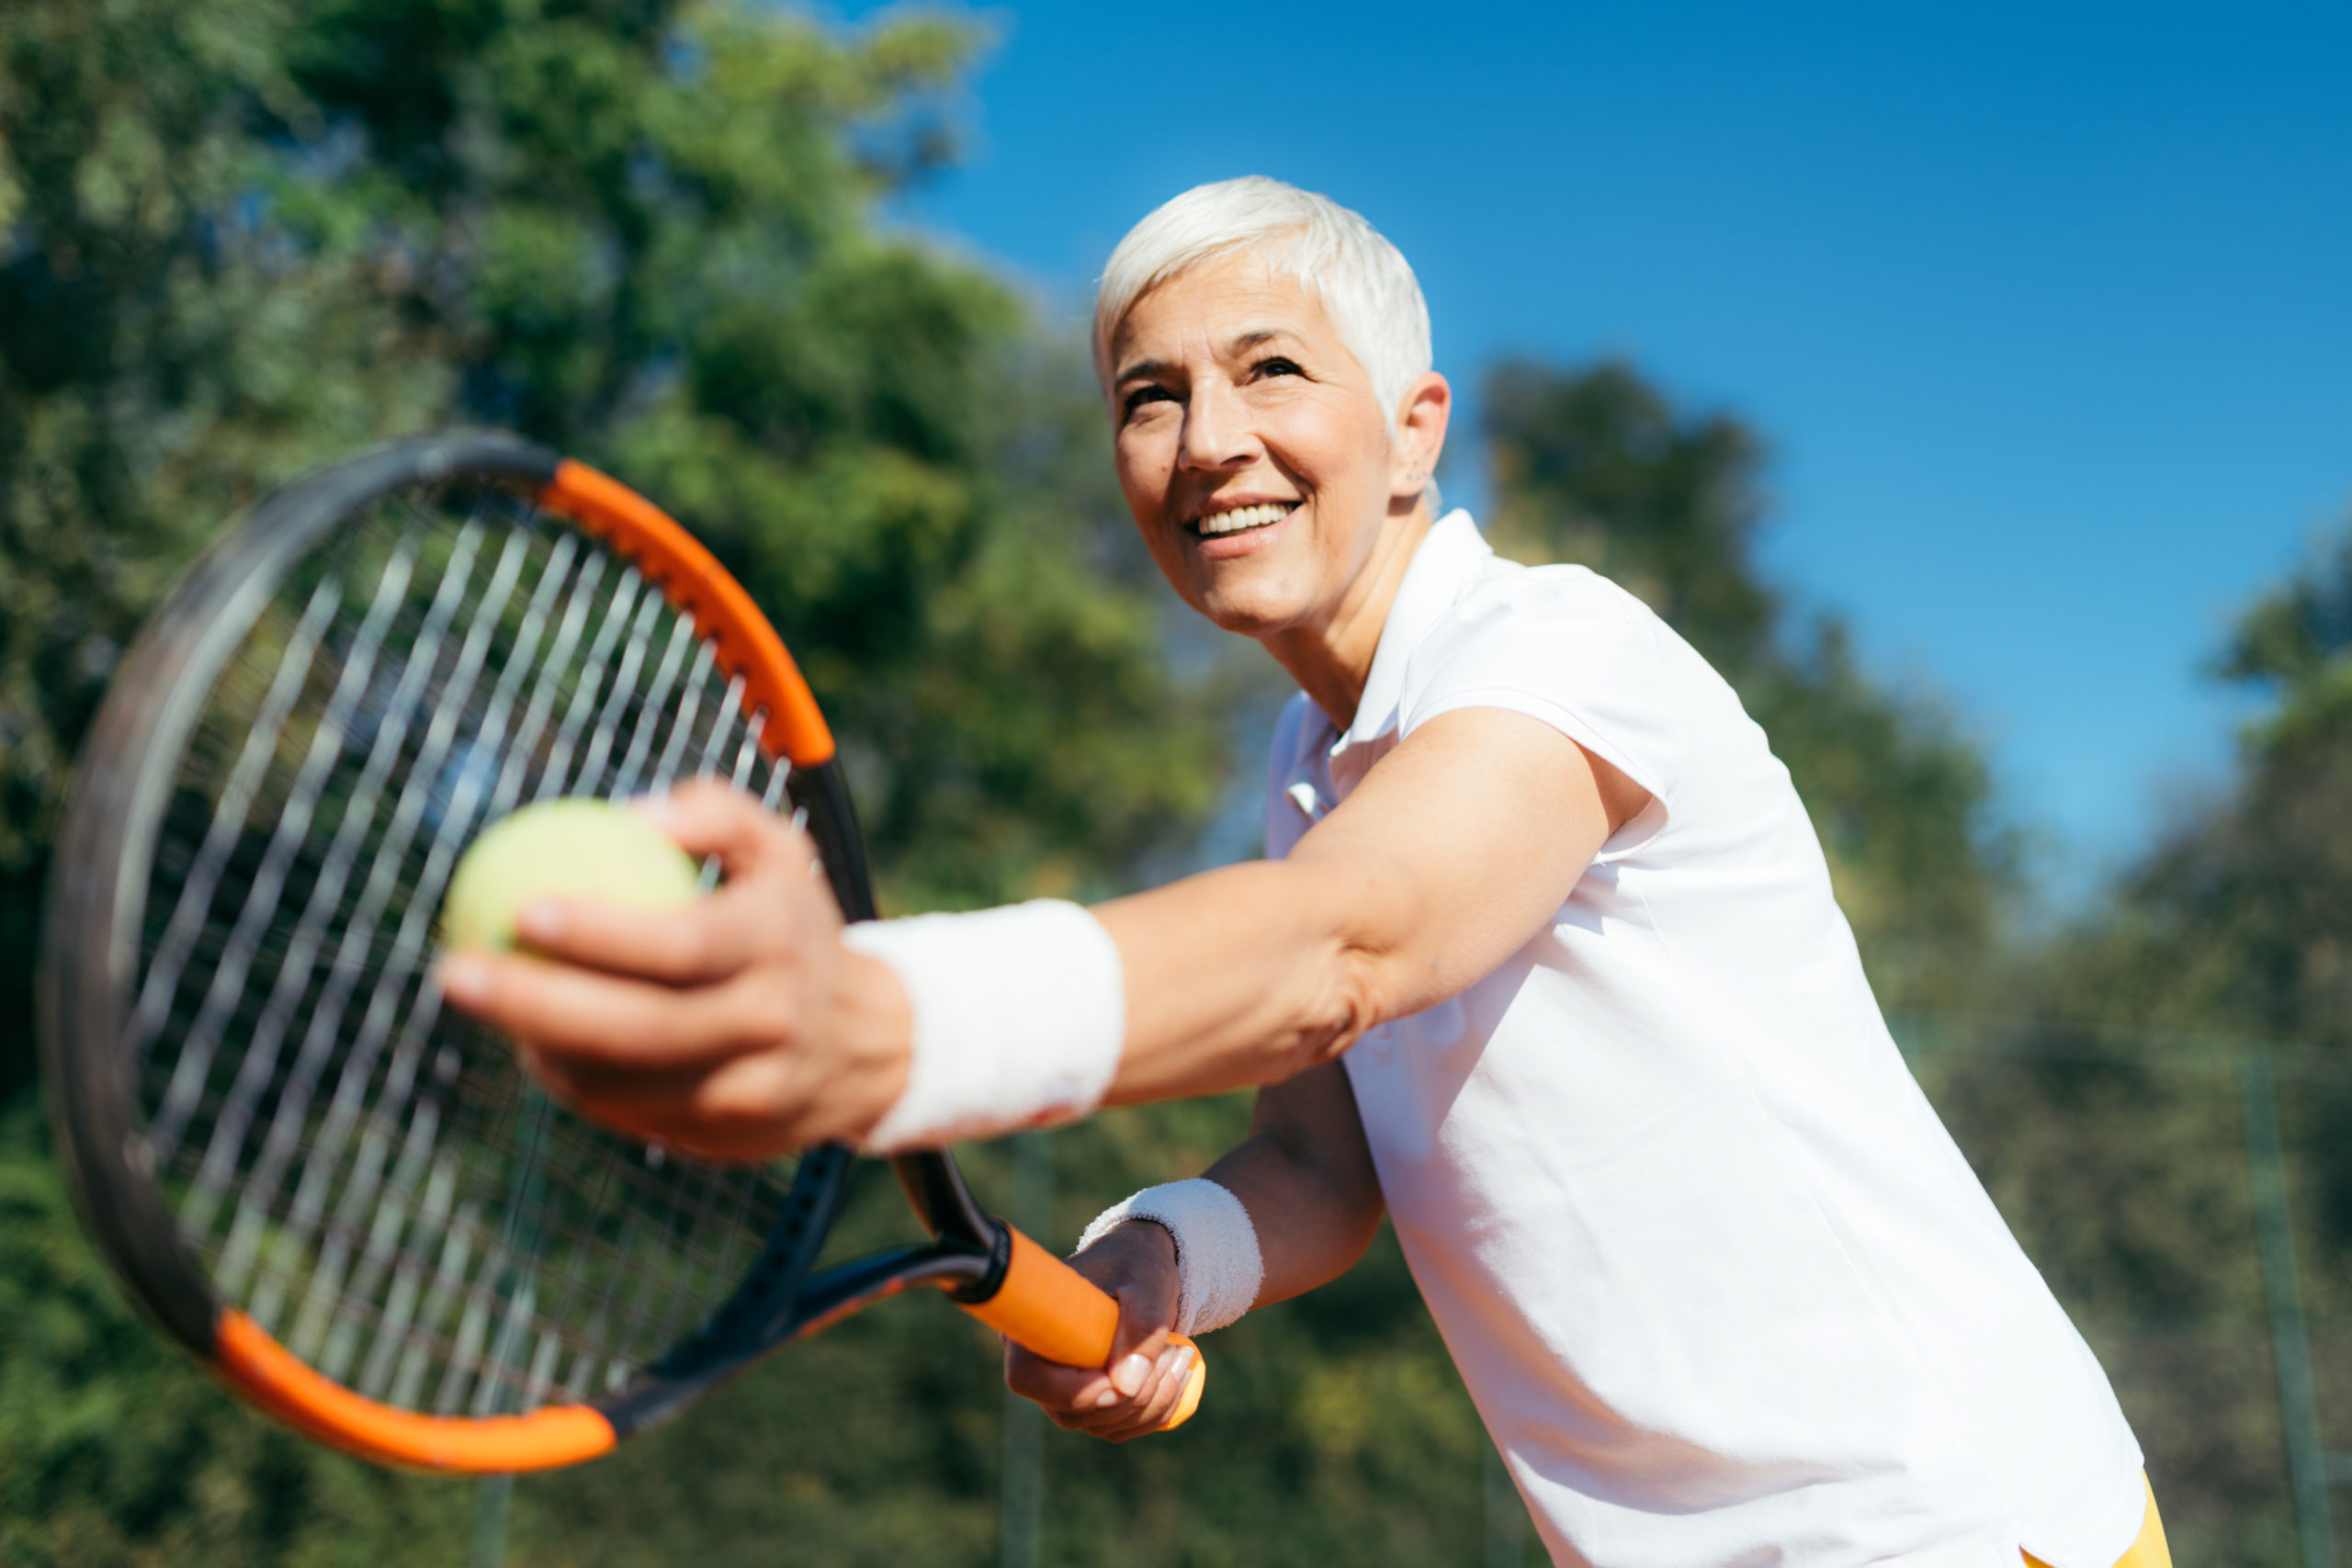 Have fun and get in shape with a home tennis court!